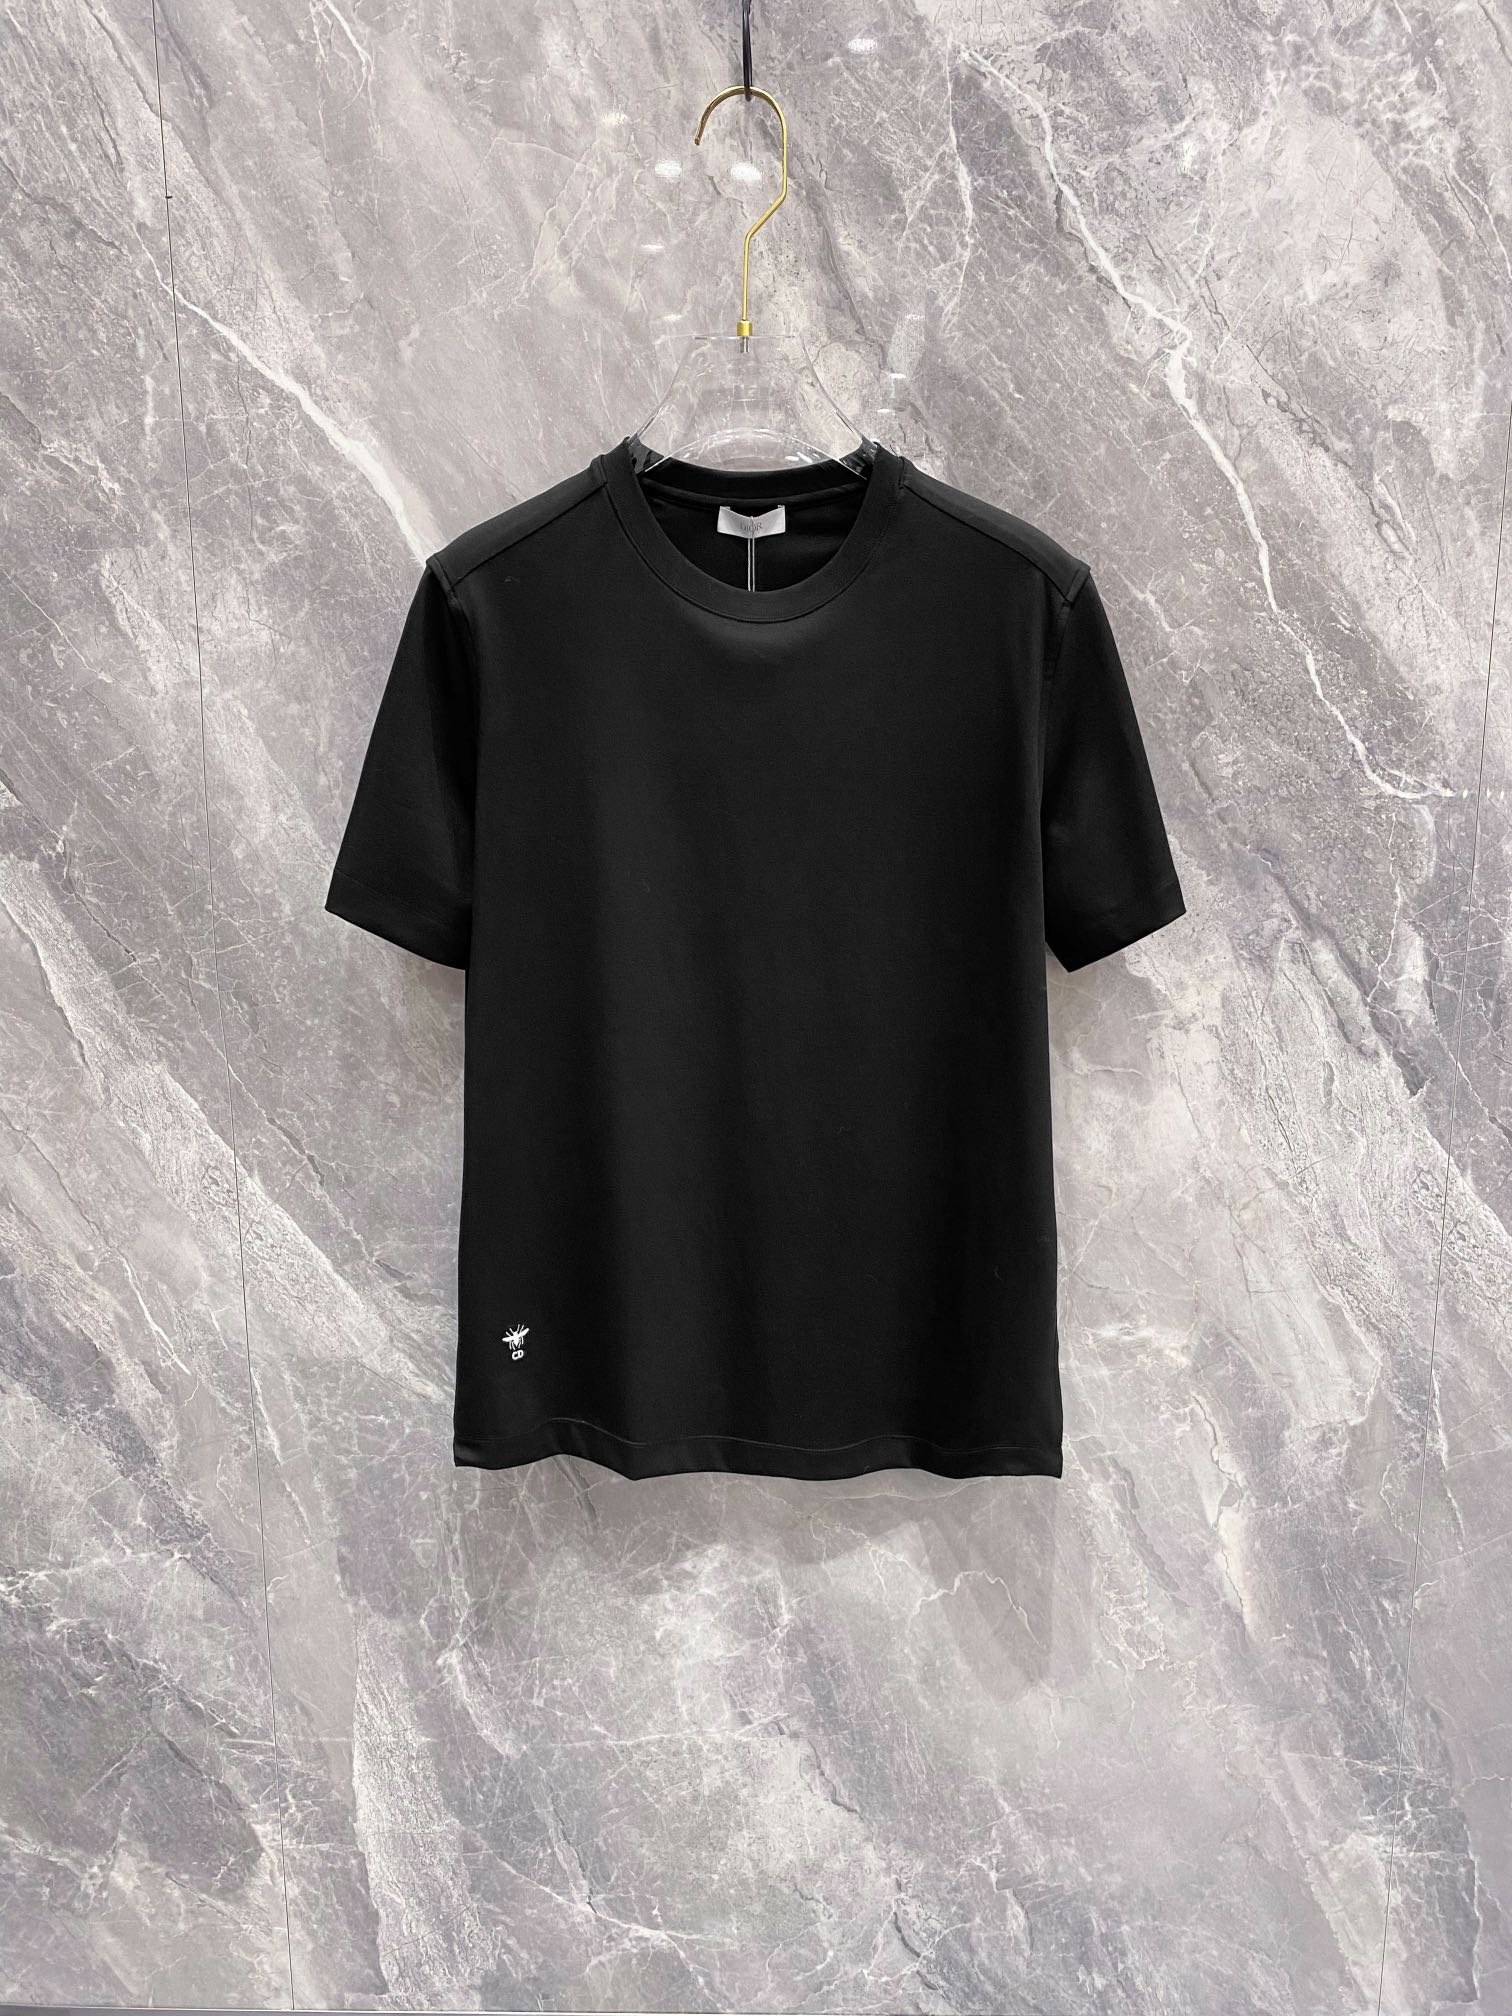 Is it OK to buy replica
 Dior Clothing T-Shirt Same as Original
 Unisex Cotton Short Sleeve